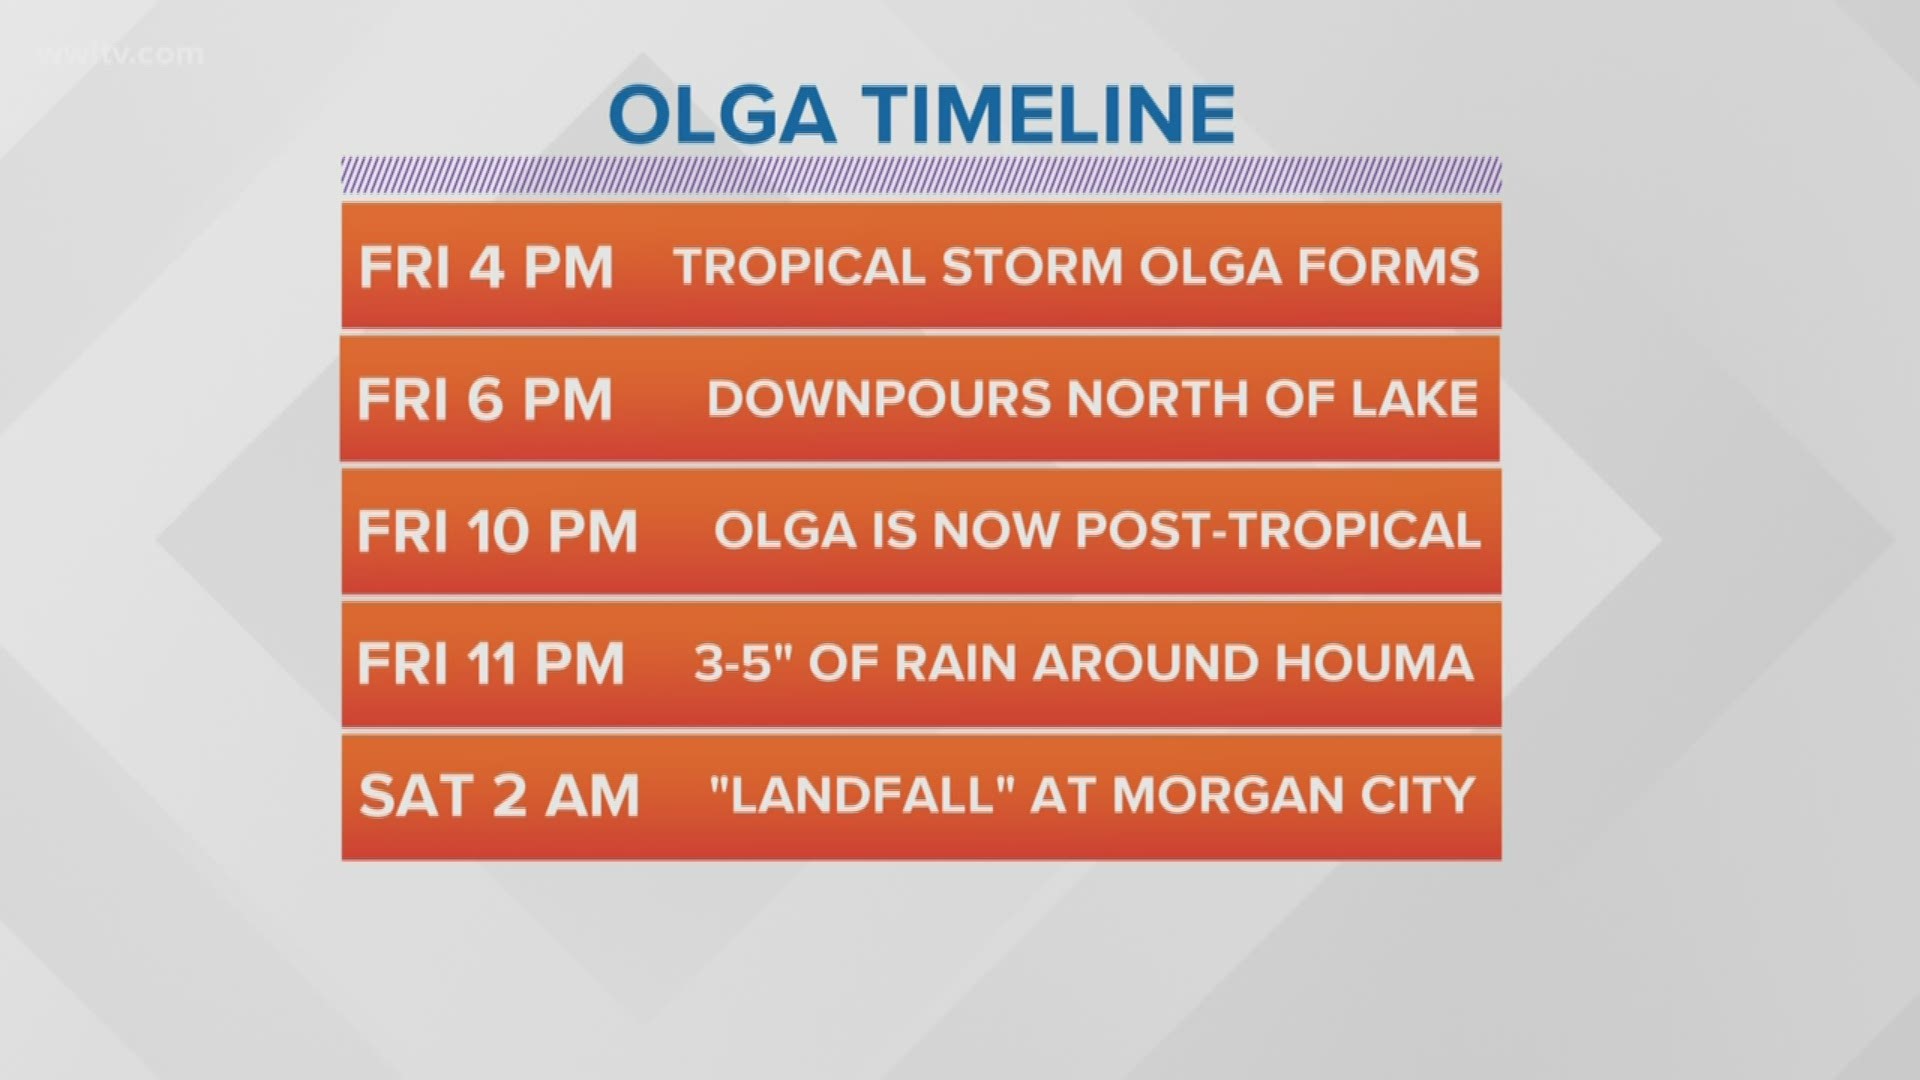 Your local weather expert Alexandra Cranford goes over Tropical Storm Olga's landfall.